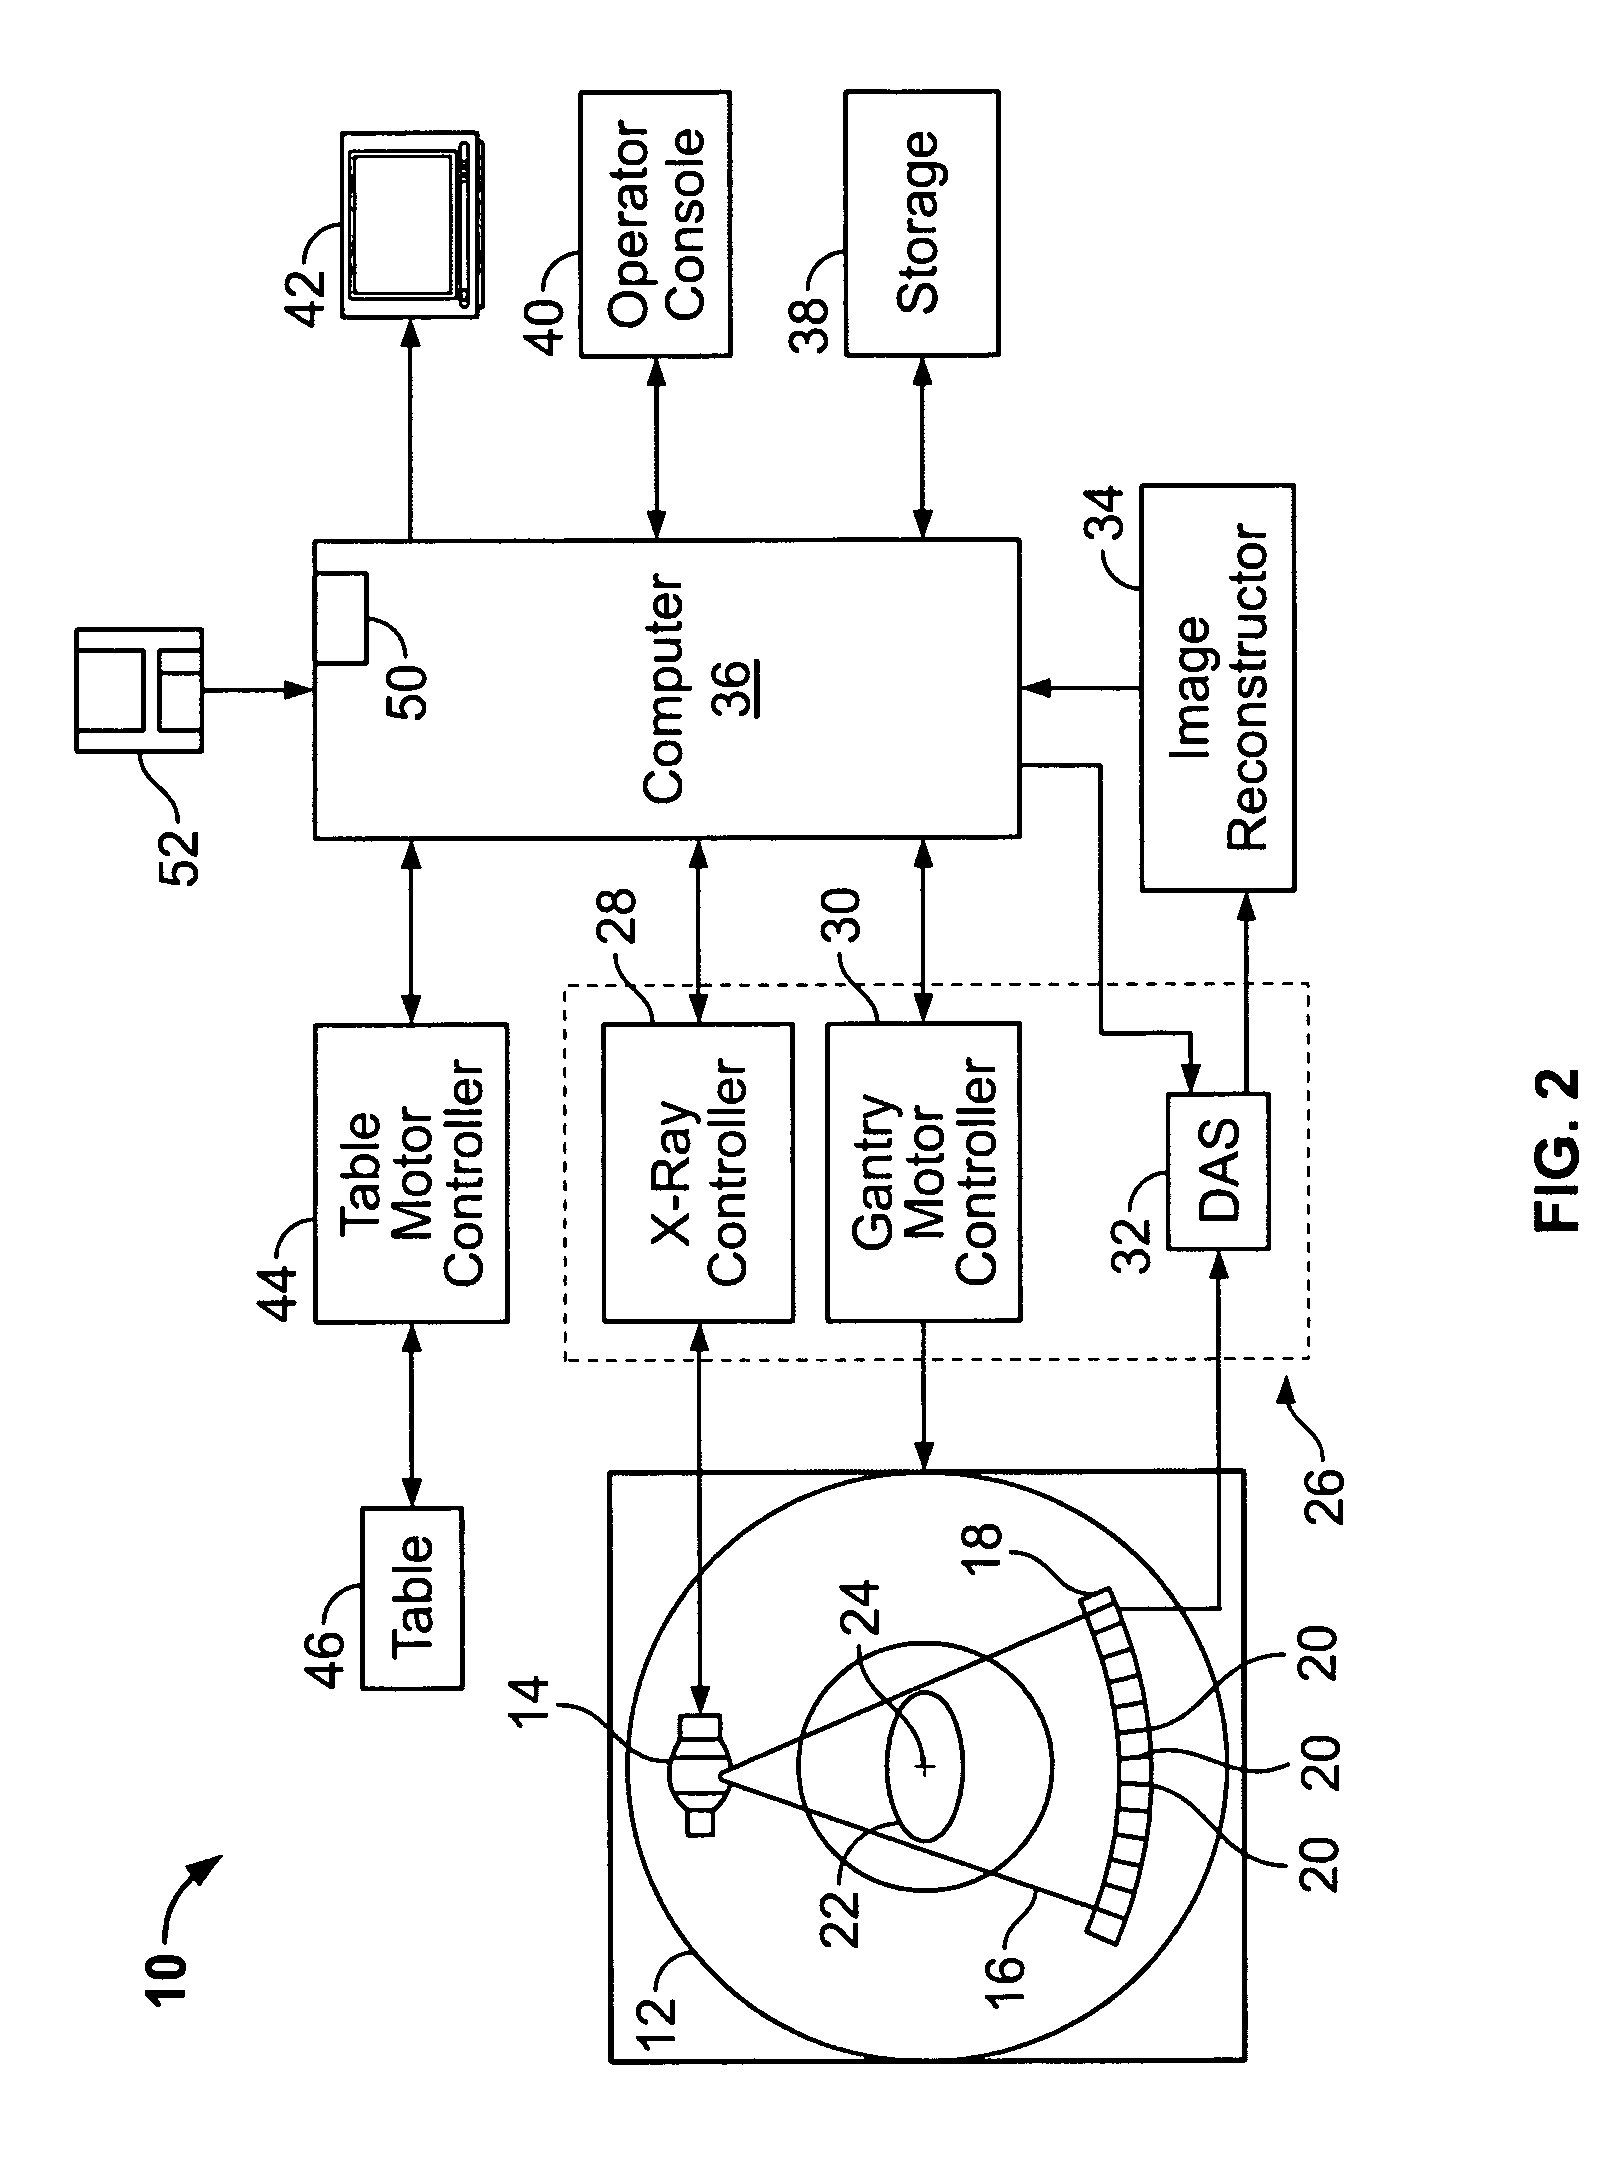 Methods and apparatus for suppressing tagging material in prepless CT colonography